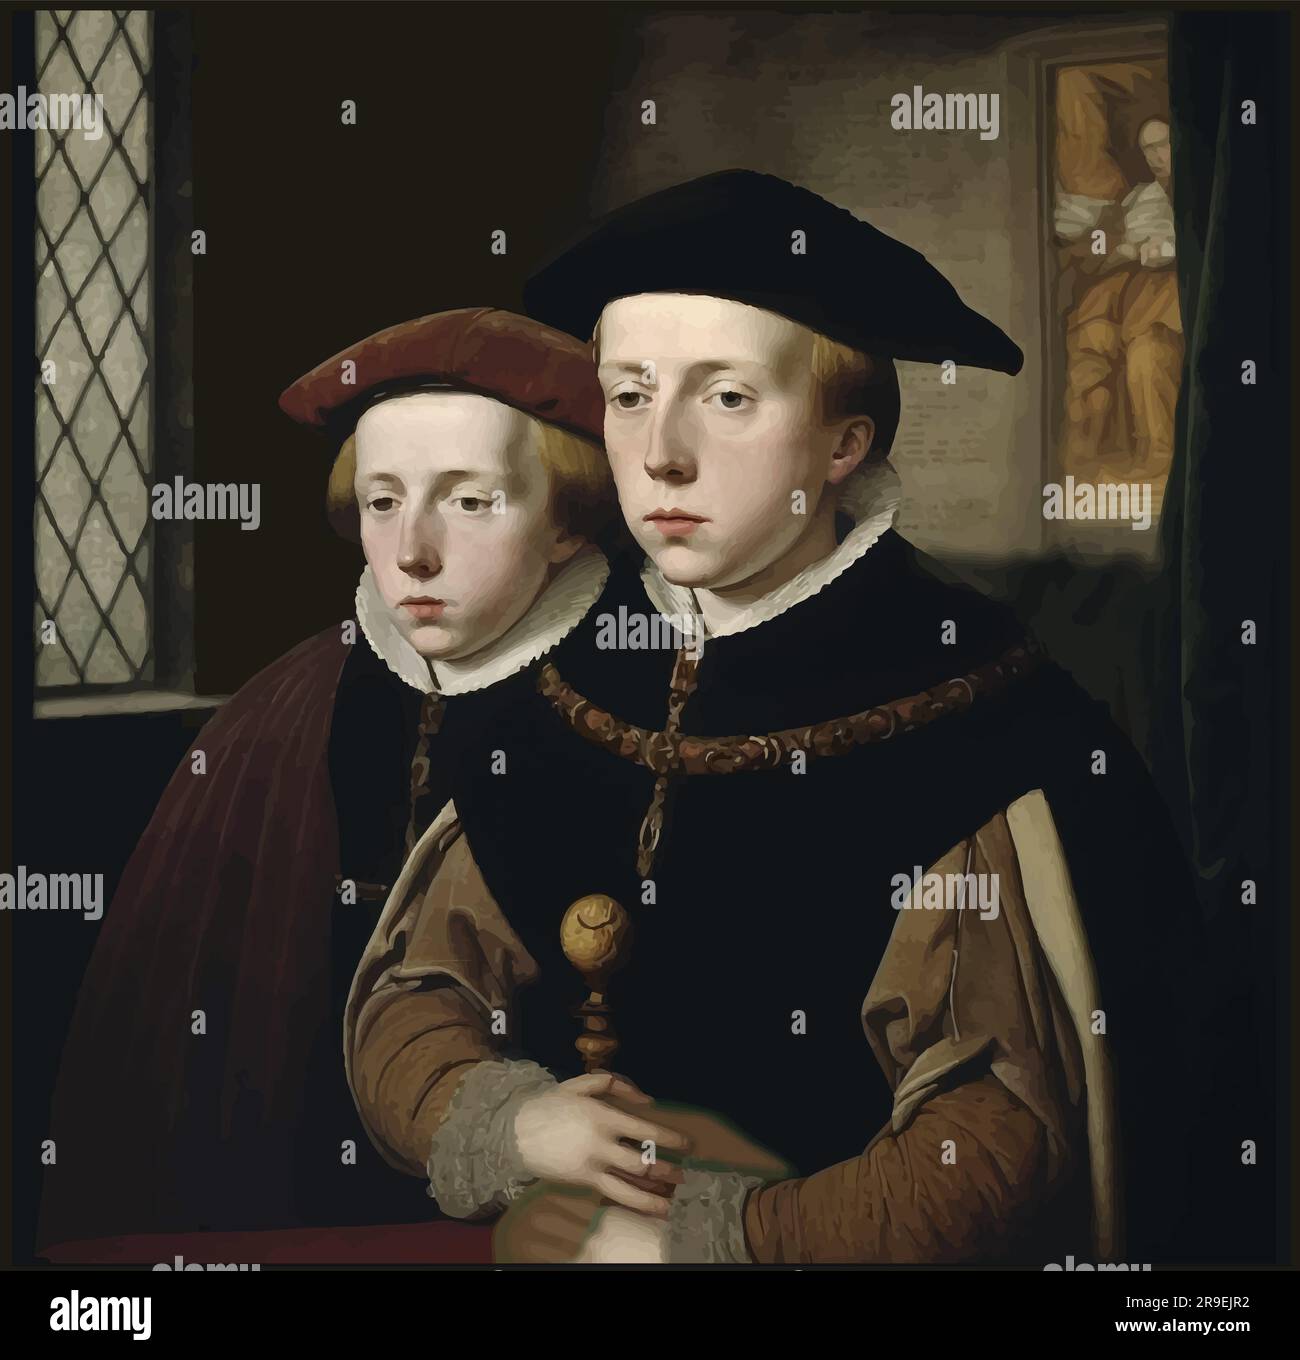 Vector portrait of Edward V and his younger brother, Richard of Shrewsbury, Duke of York (d. 1483). They were called the Princes in the Tower. Stock Vector